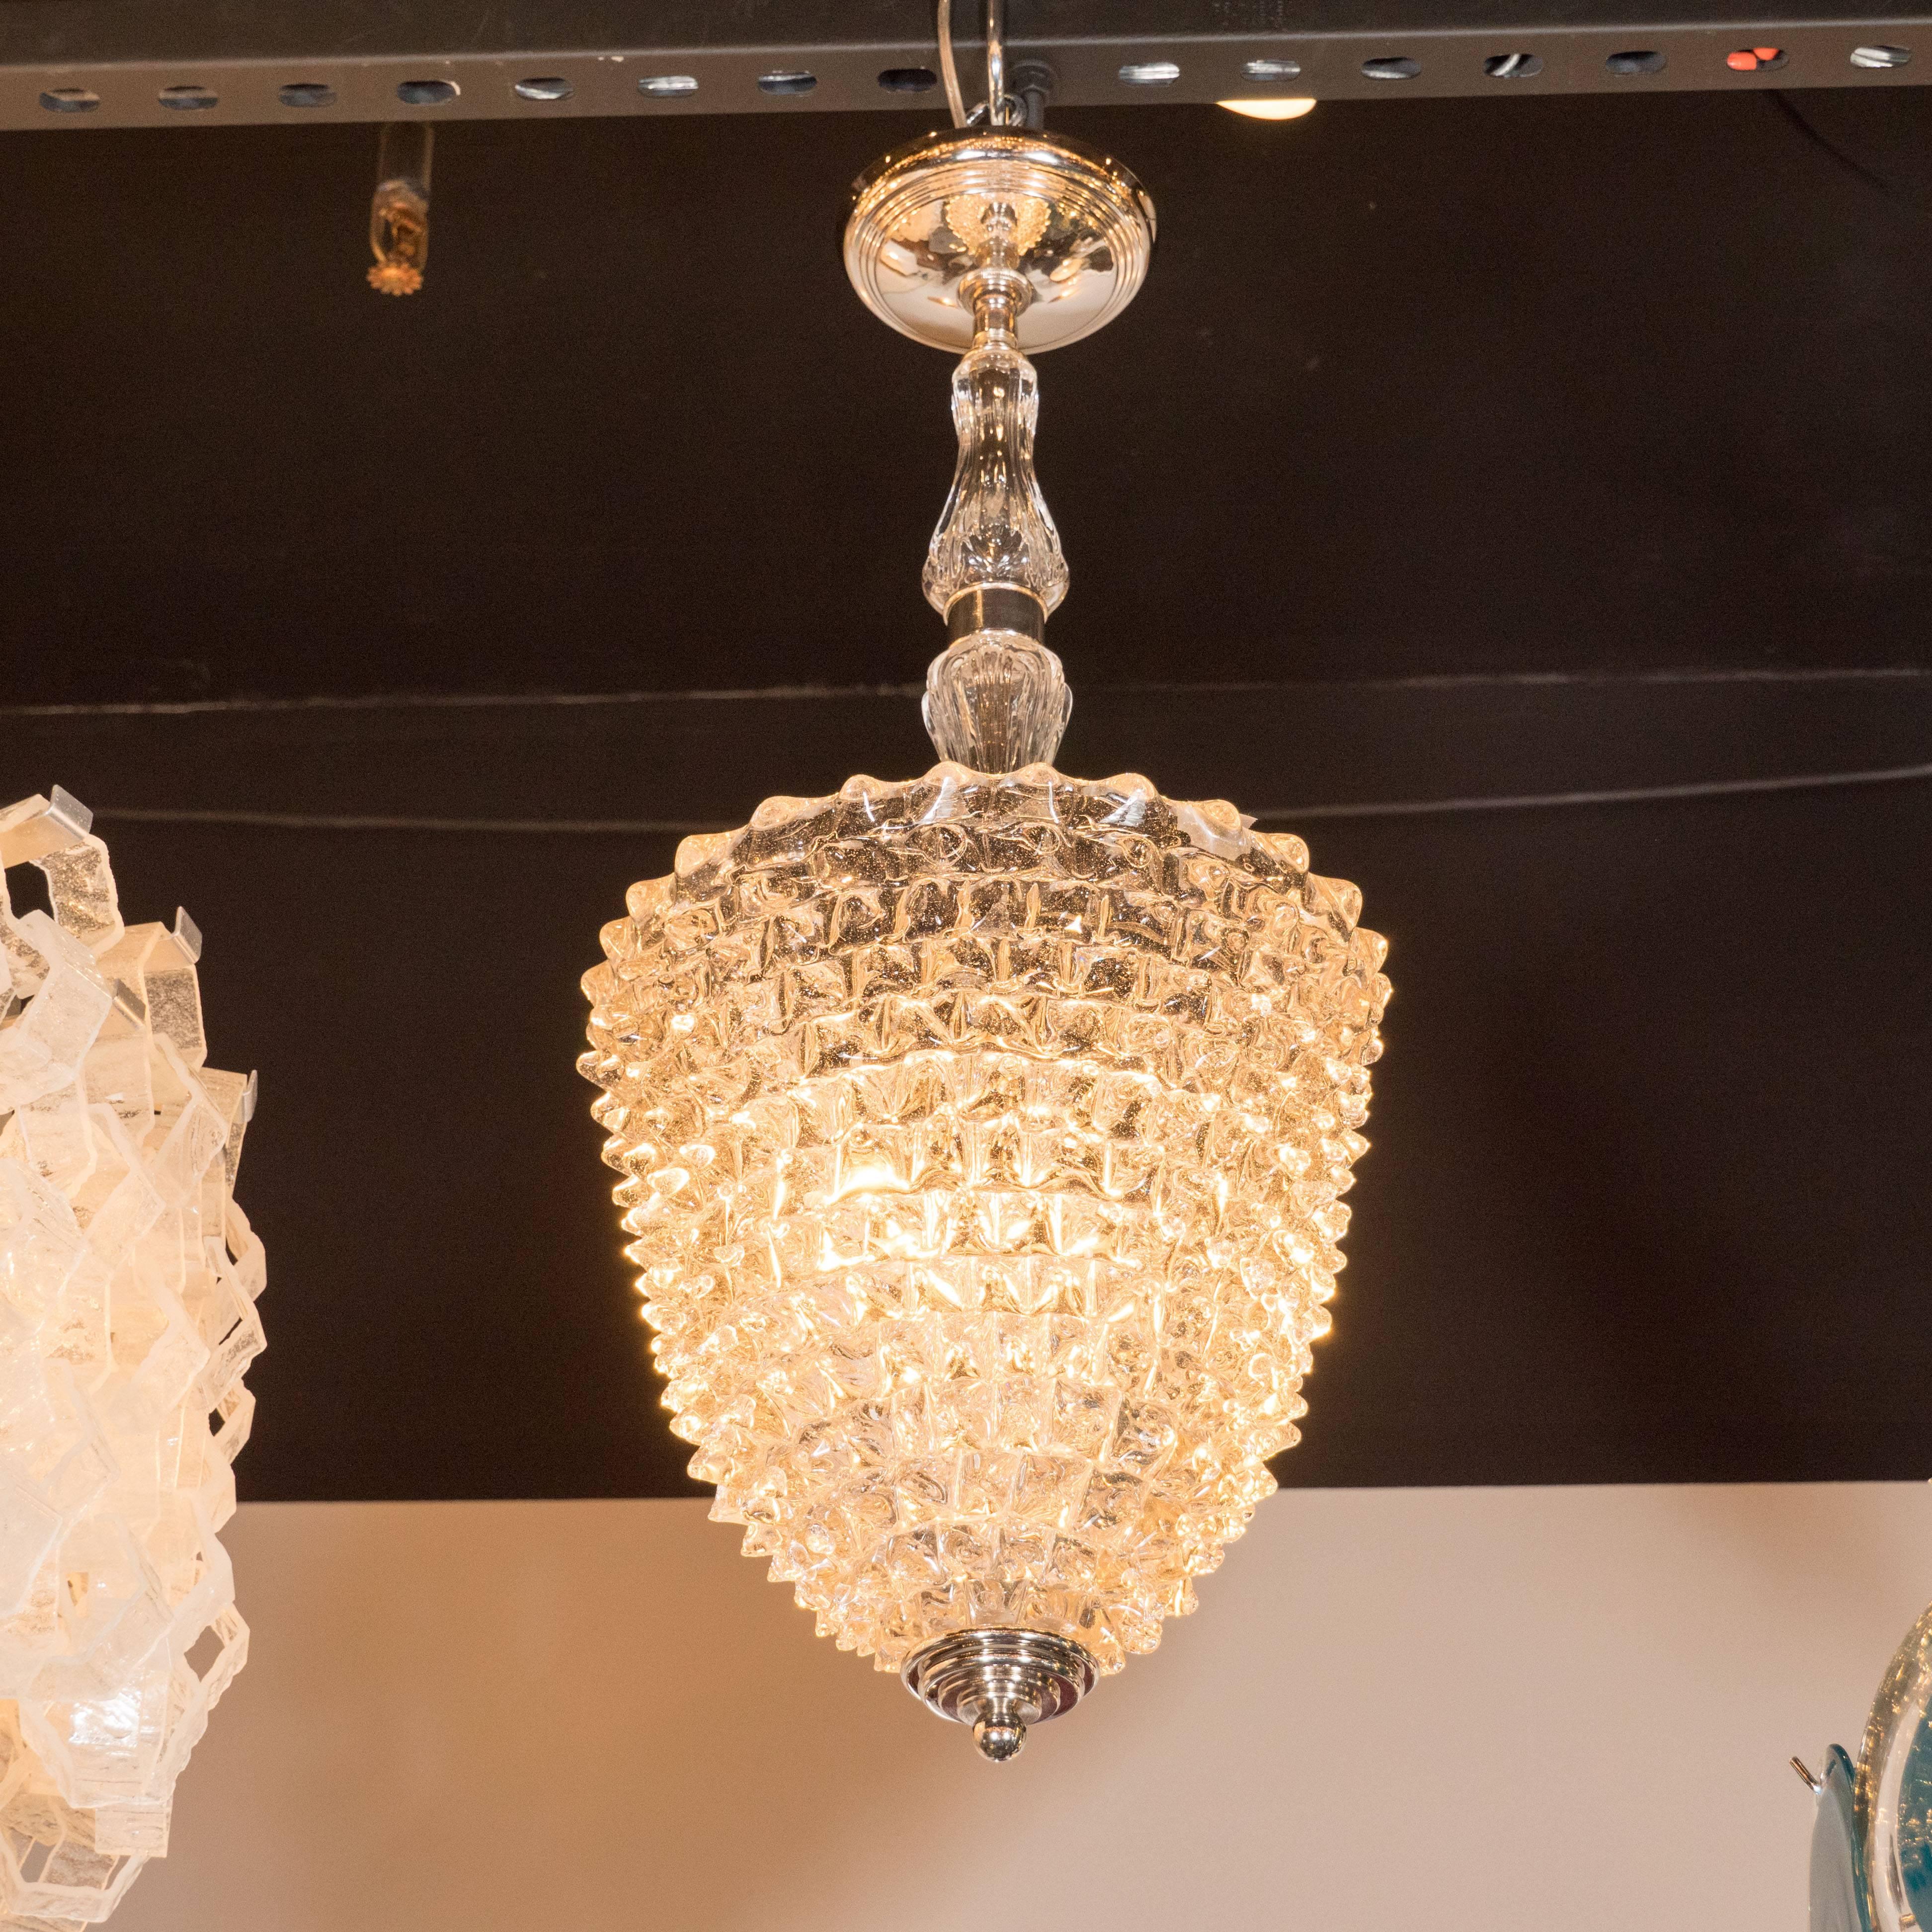 This gorgeous vintage pendant was realized by the illustrious 20th century, Italian lighting atelier, Barovier e Toso, circa 1945. It offers a conical form replete with an abundance of small protrusions creating a unique texture that testifies to